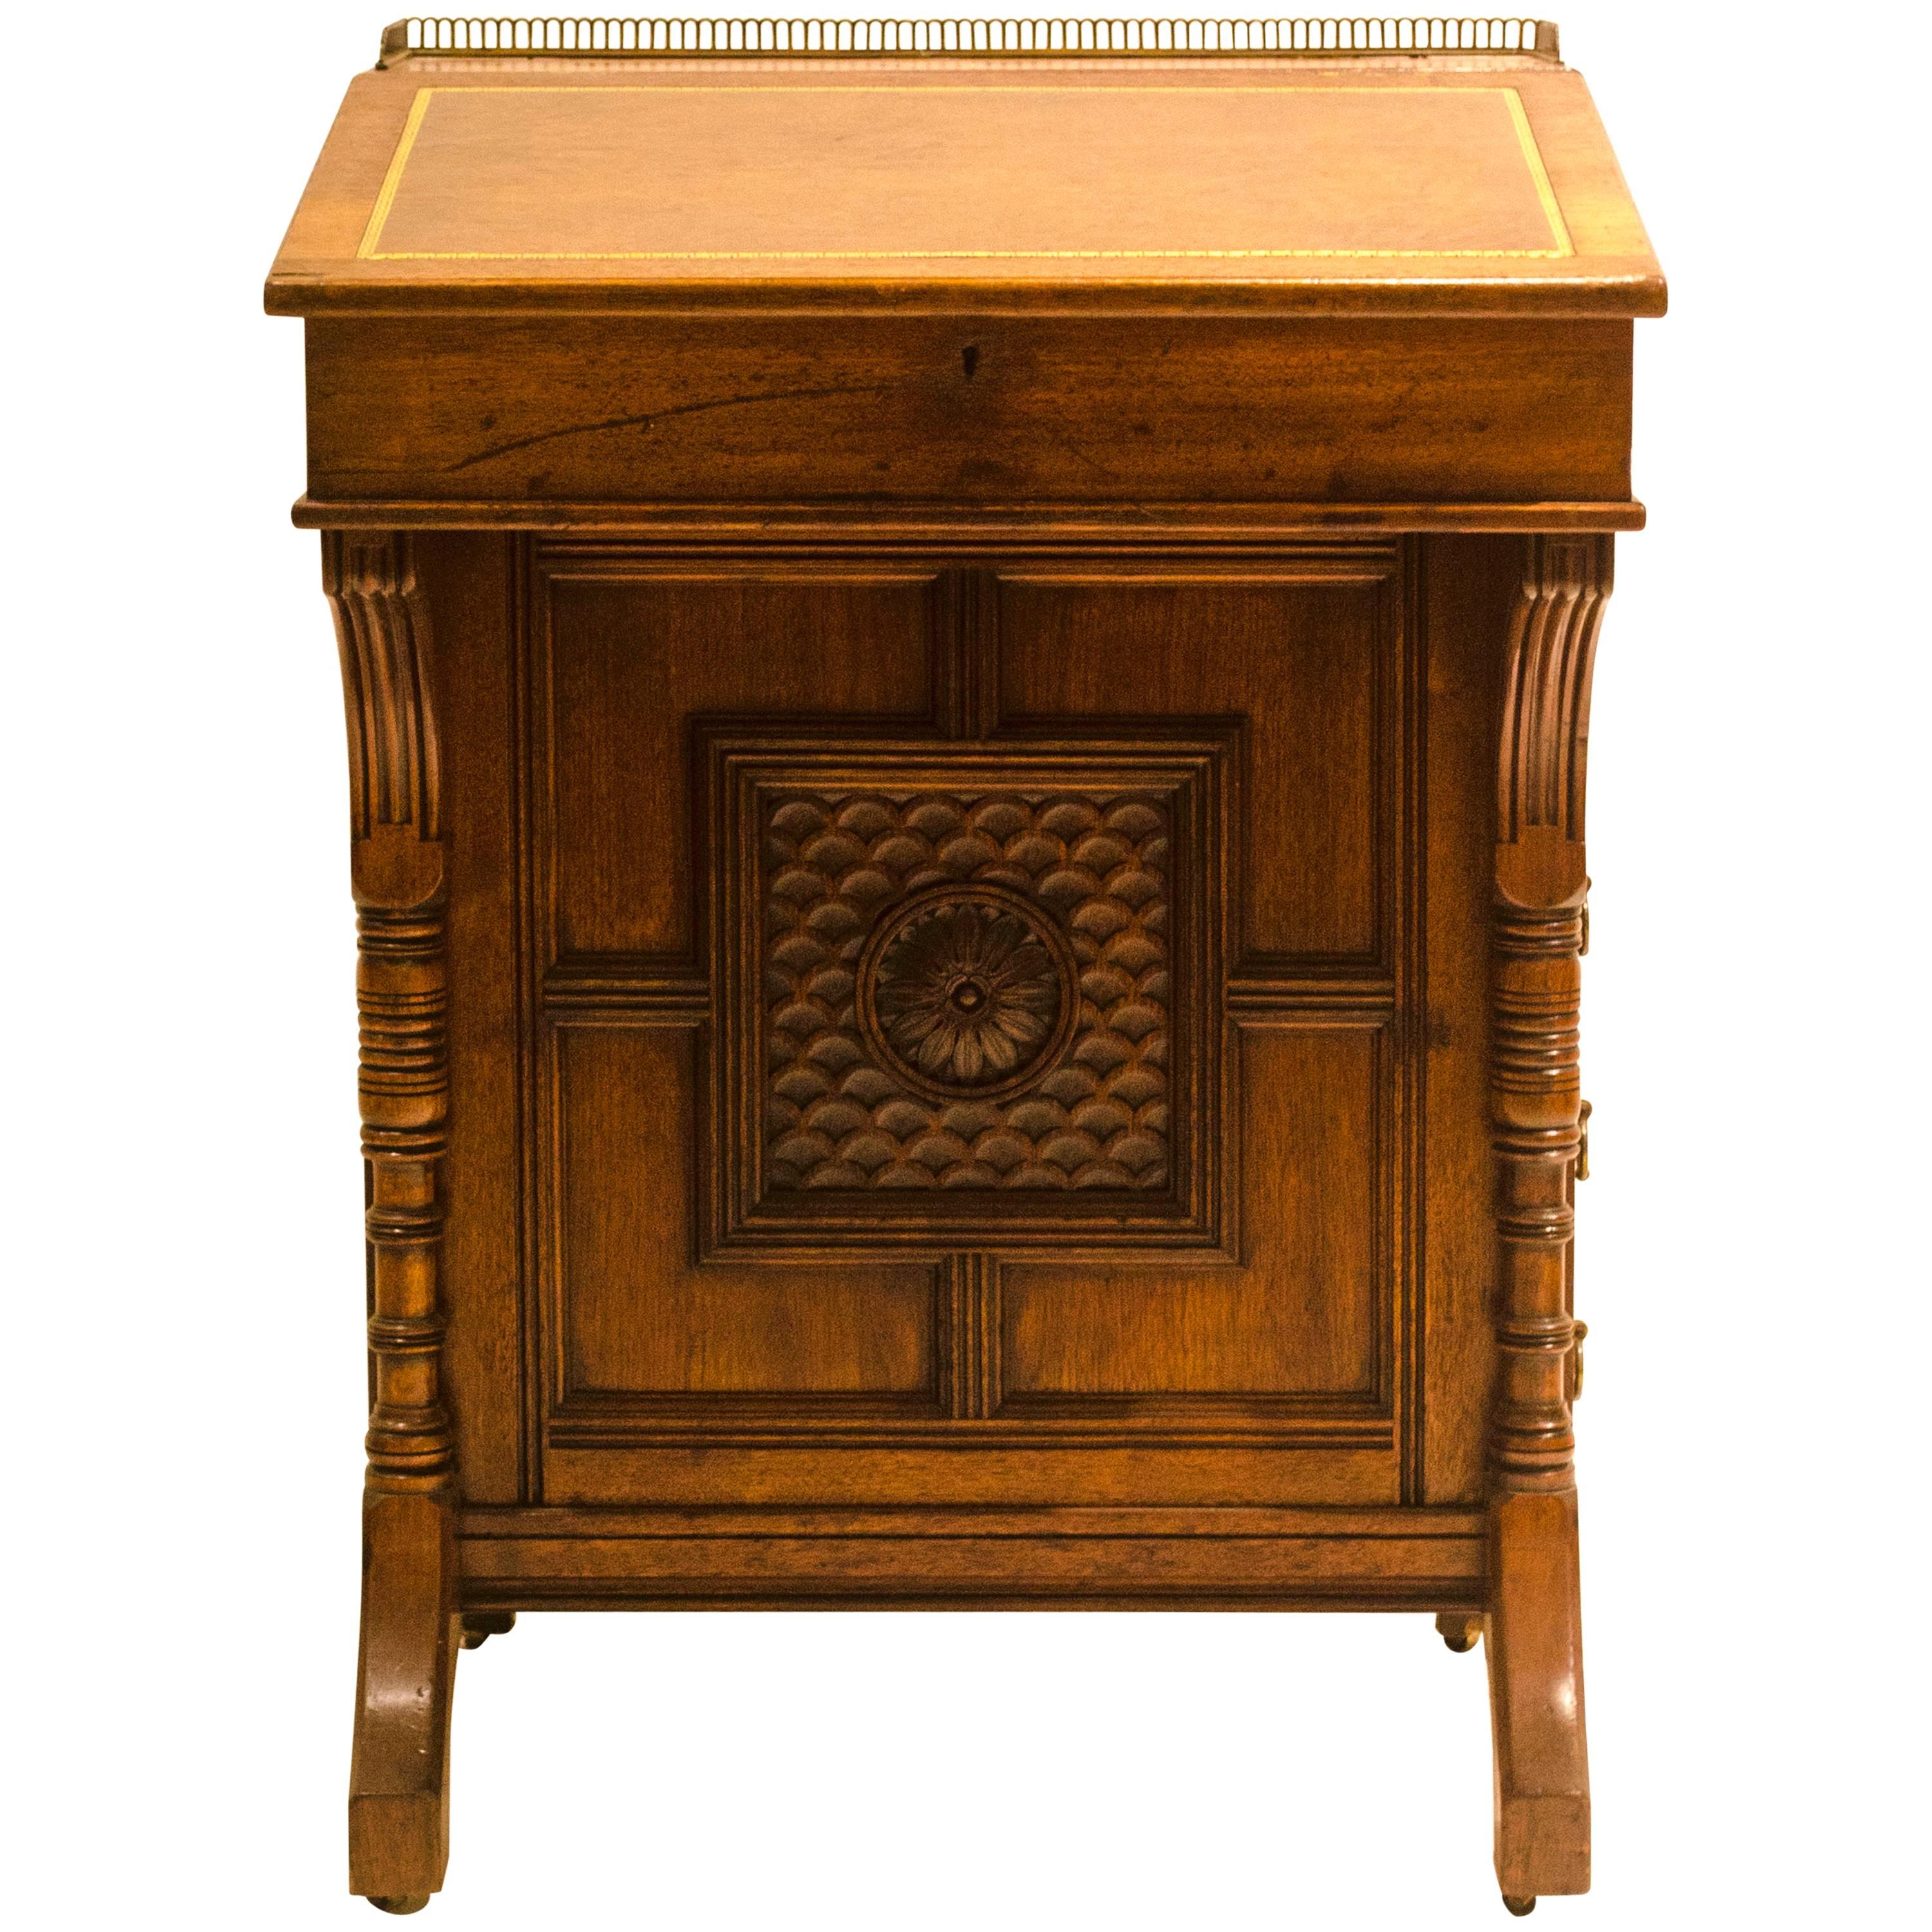 B Talbert for Gillows Aesthetic Movement Davenport with Central Carved Rosette For Sale